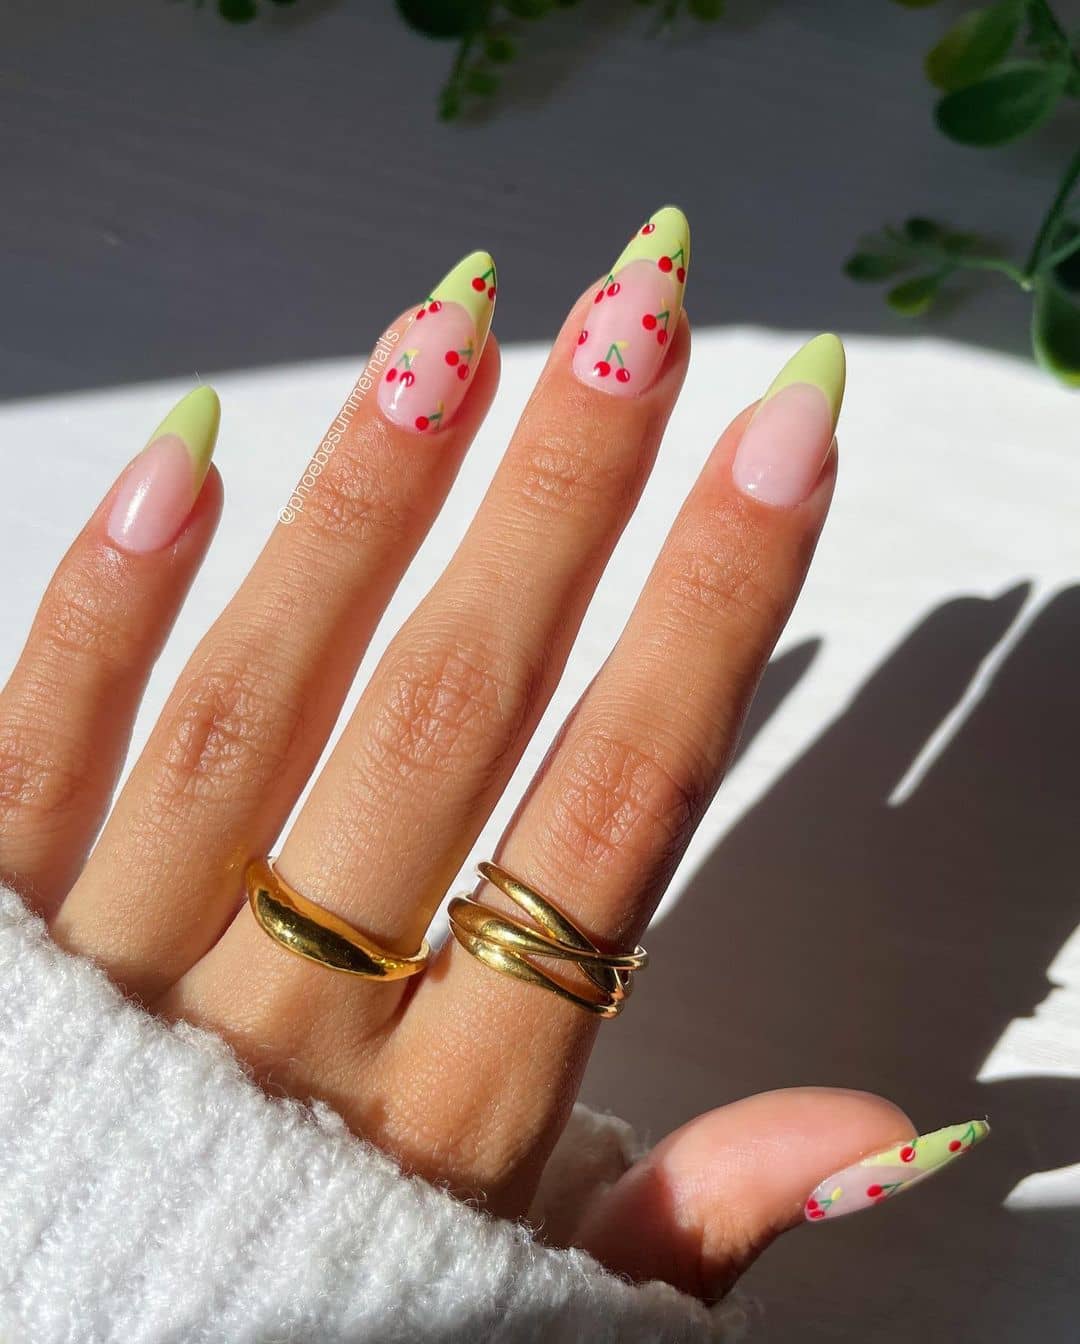 Over 100 Bright Summer Nail Art Designs That Will Be So Trendy images 5